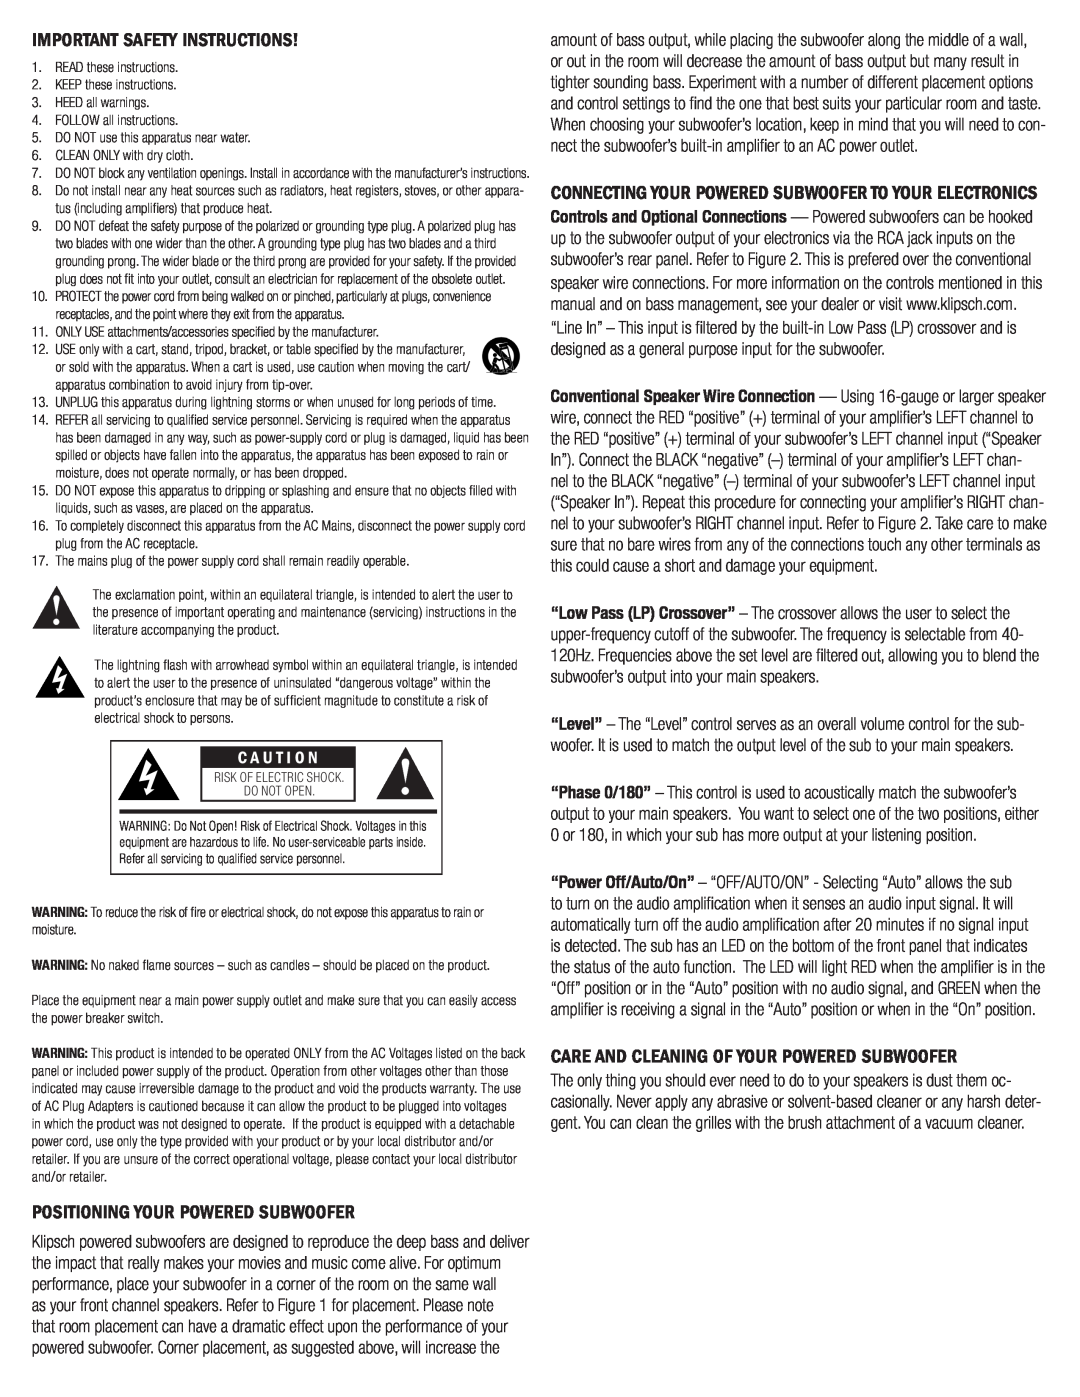 Klipsch KW-100 owner manual Important Safety Instructions, Positioning Your Powered Subwoofer, C A U T I O N 